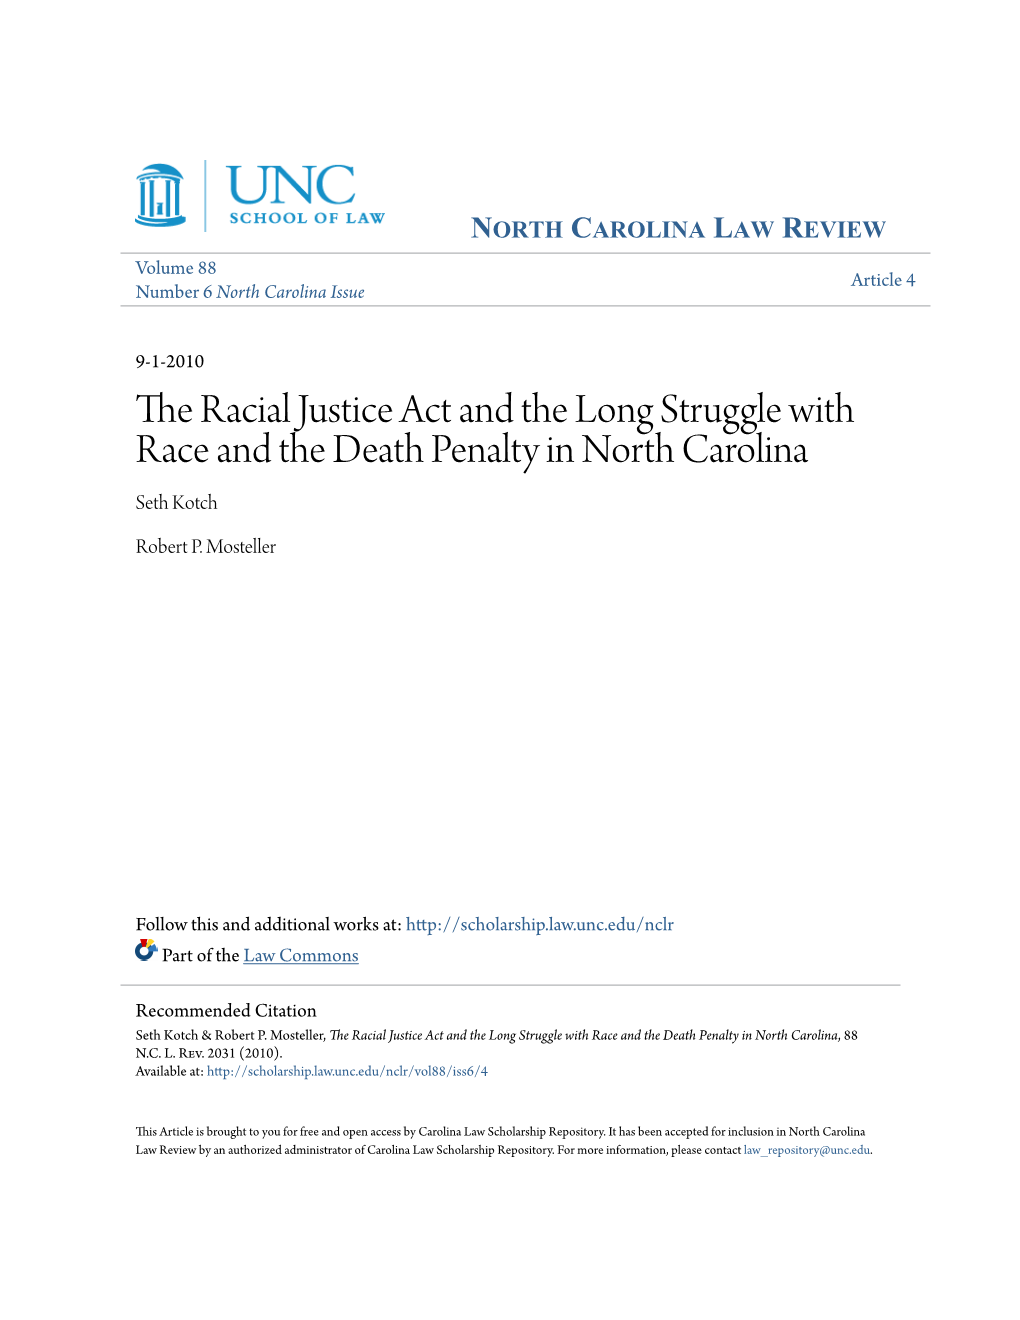 The Racial Justice Act and the Long Struggle with Race and the Death Penalty in North Carolina Seth Kotch